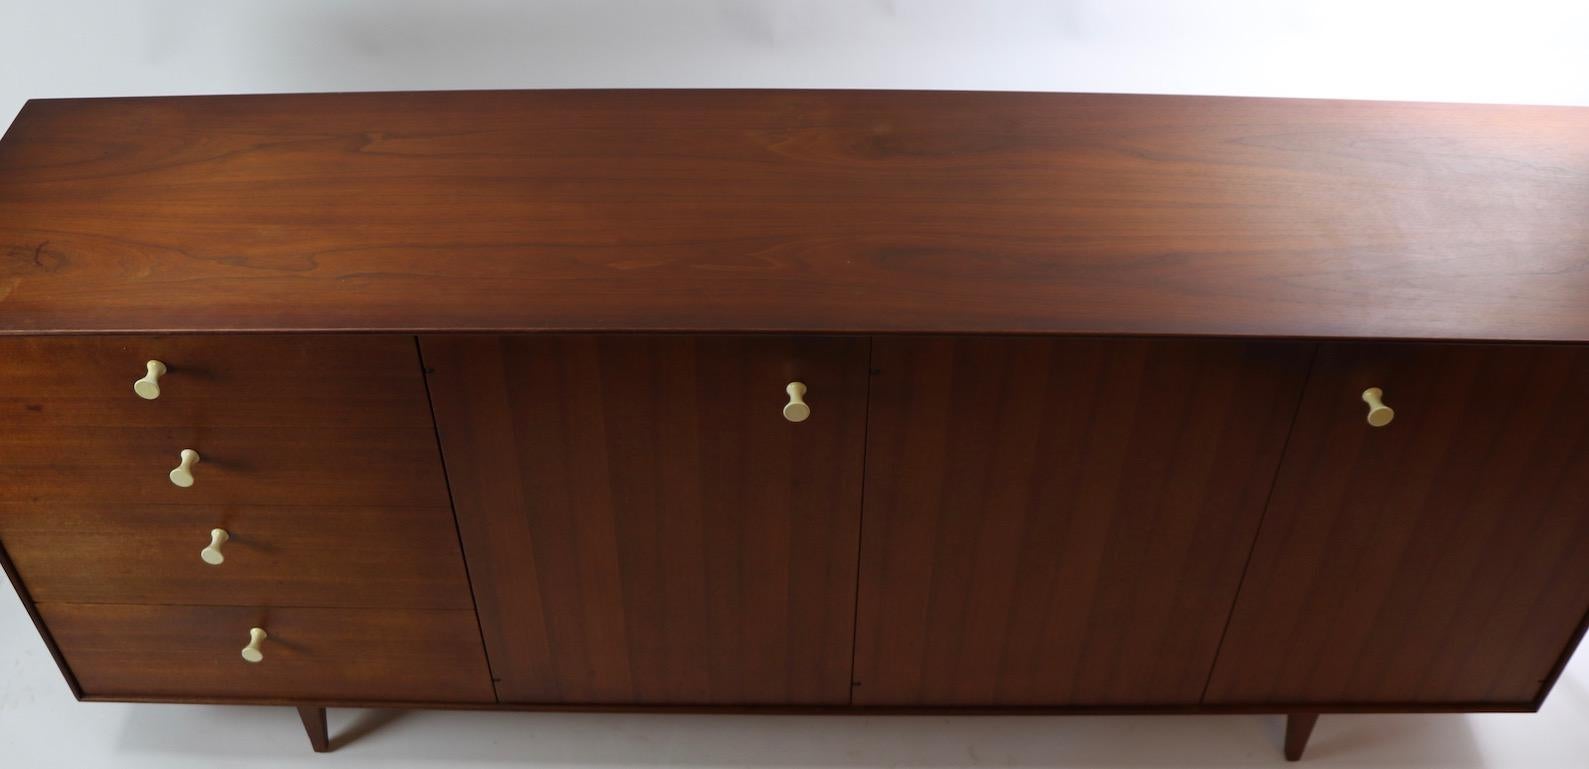 20th Century George Nelson Thin Edge Credenza Sideboard for Herman Miller For Sale